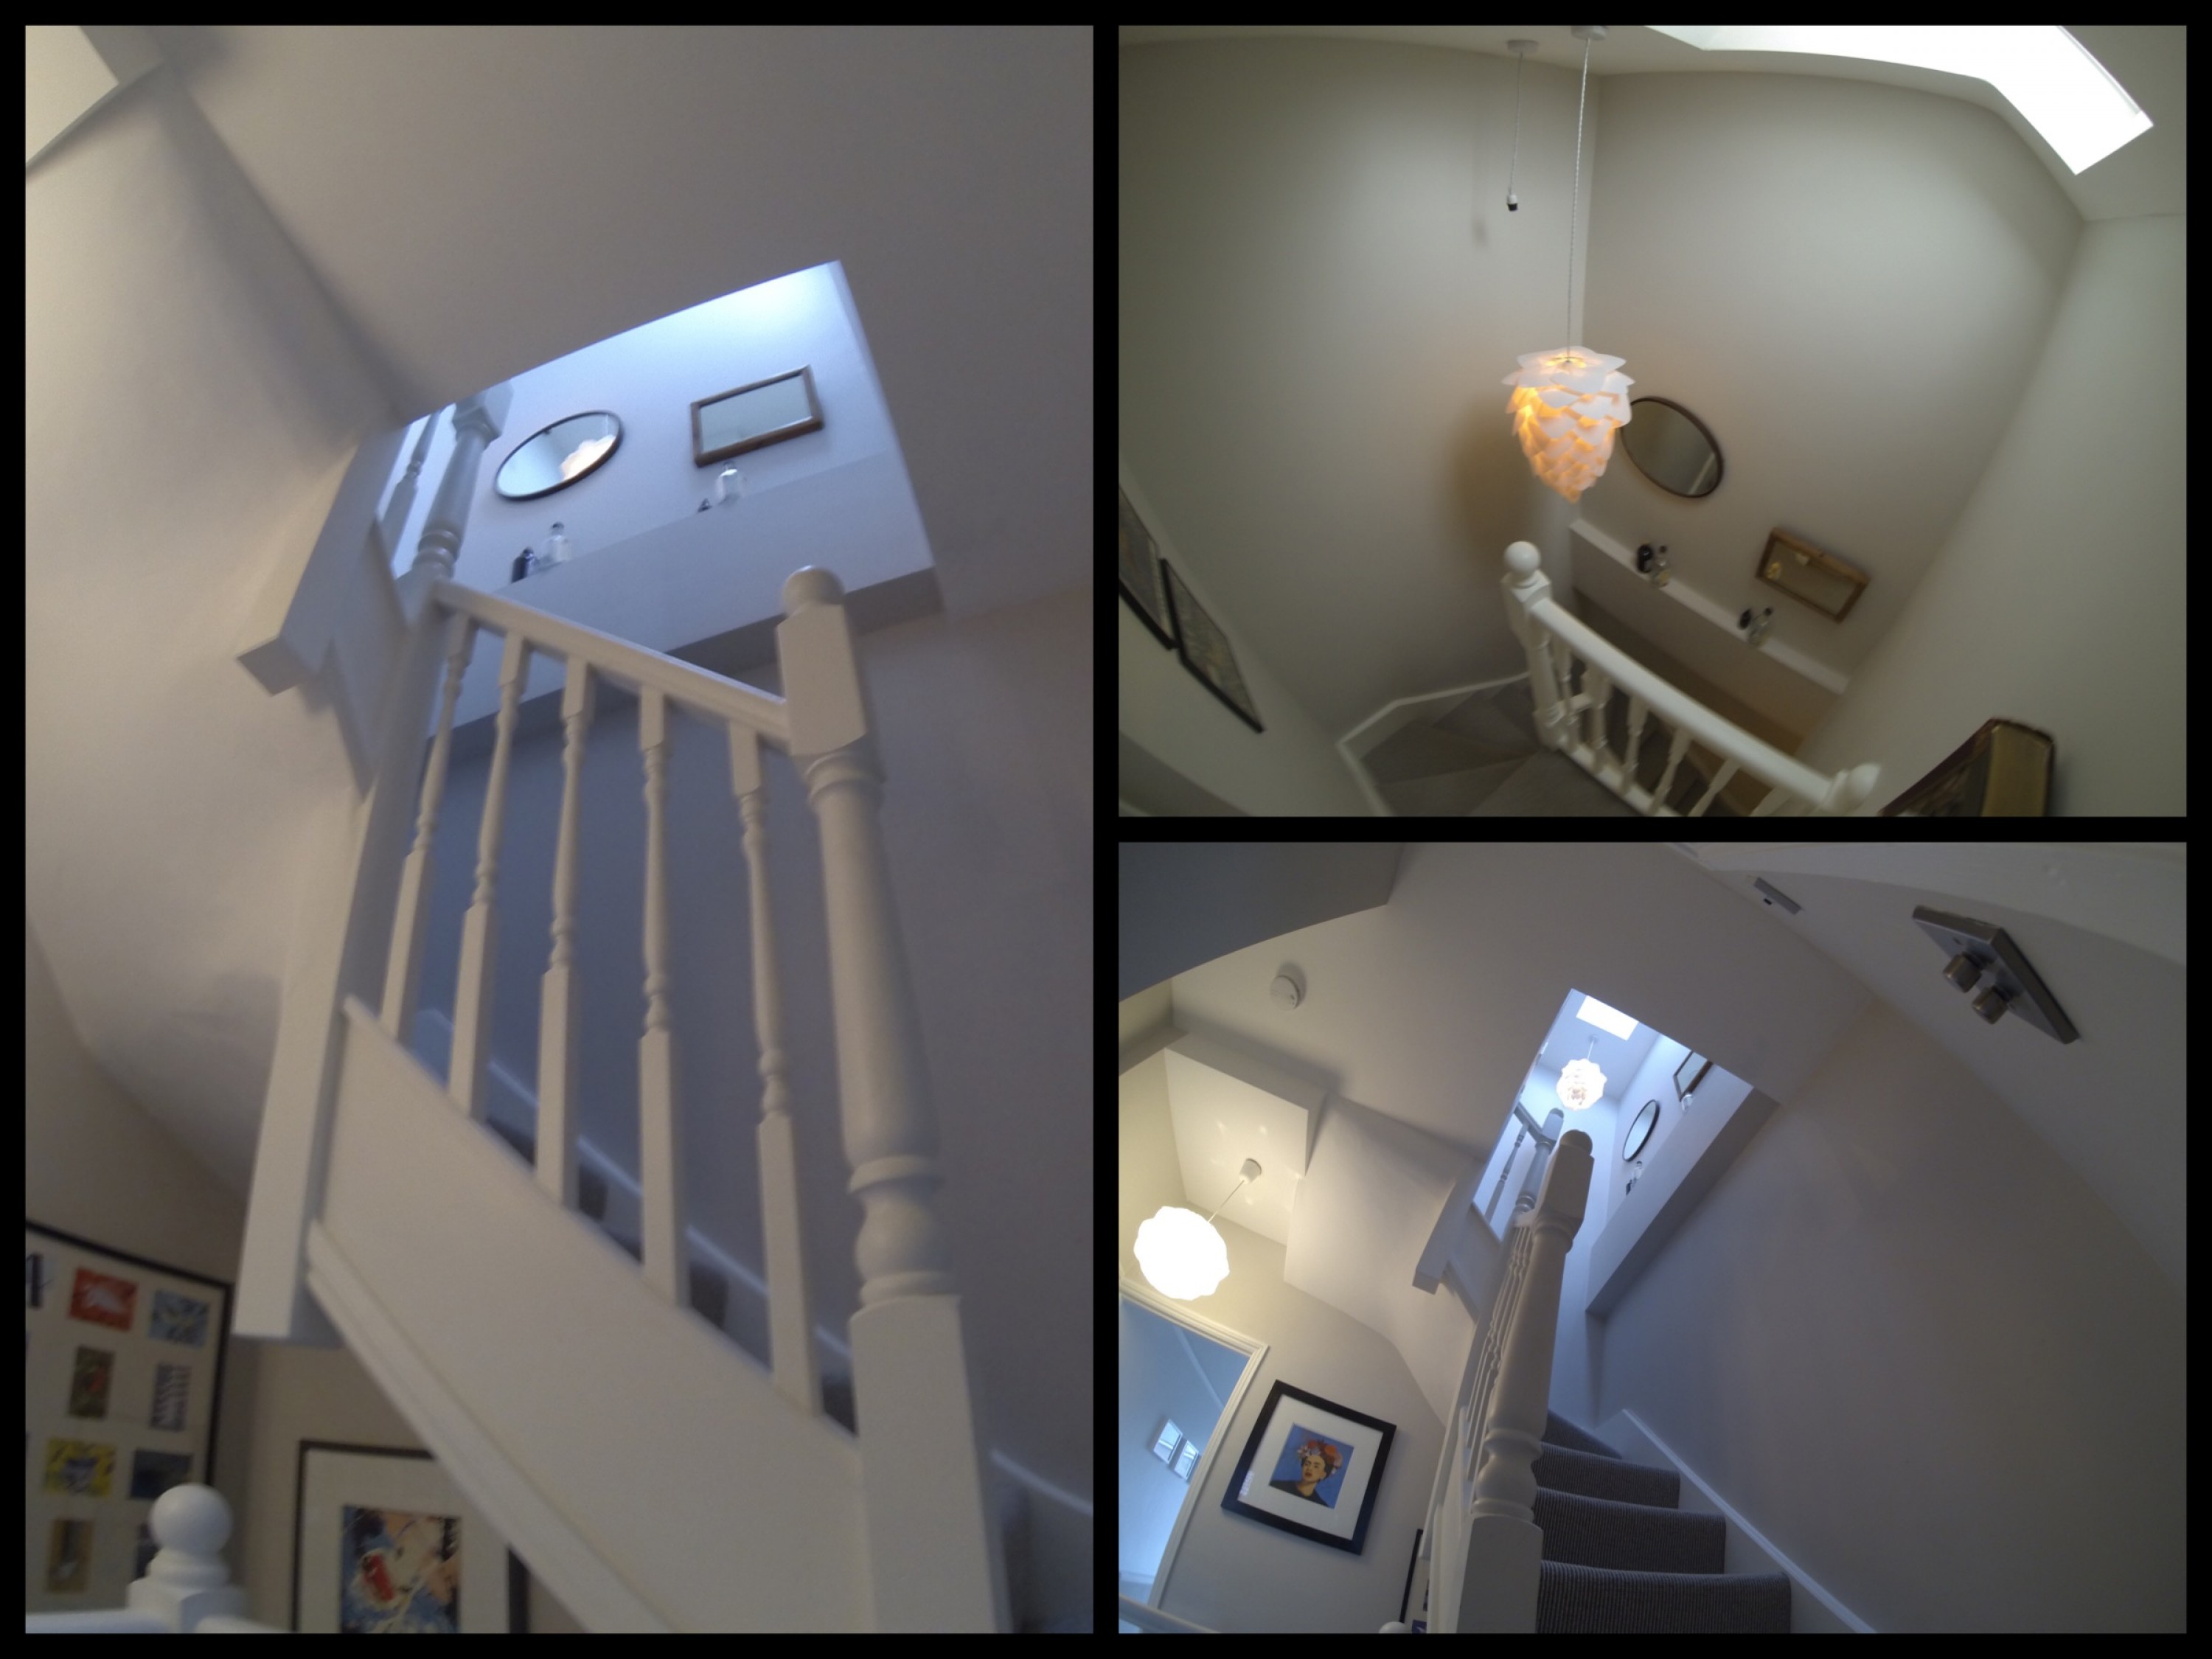 Stairs to the loft